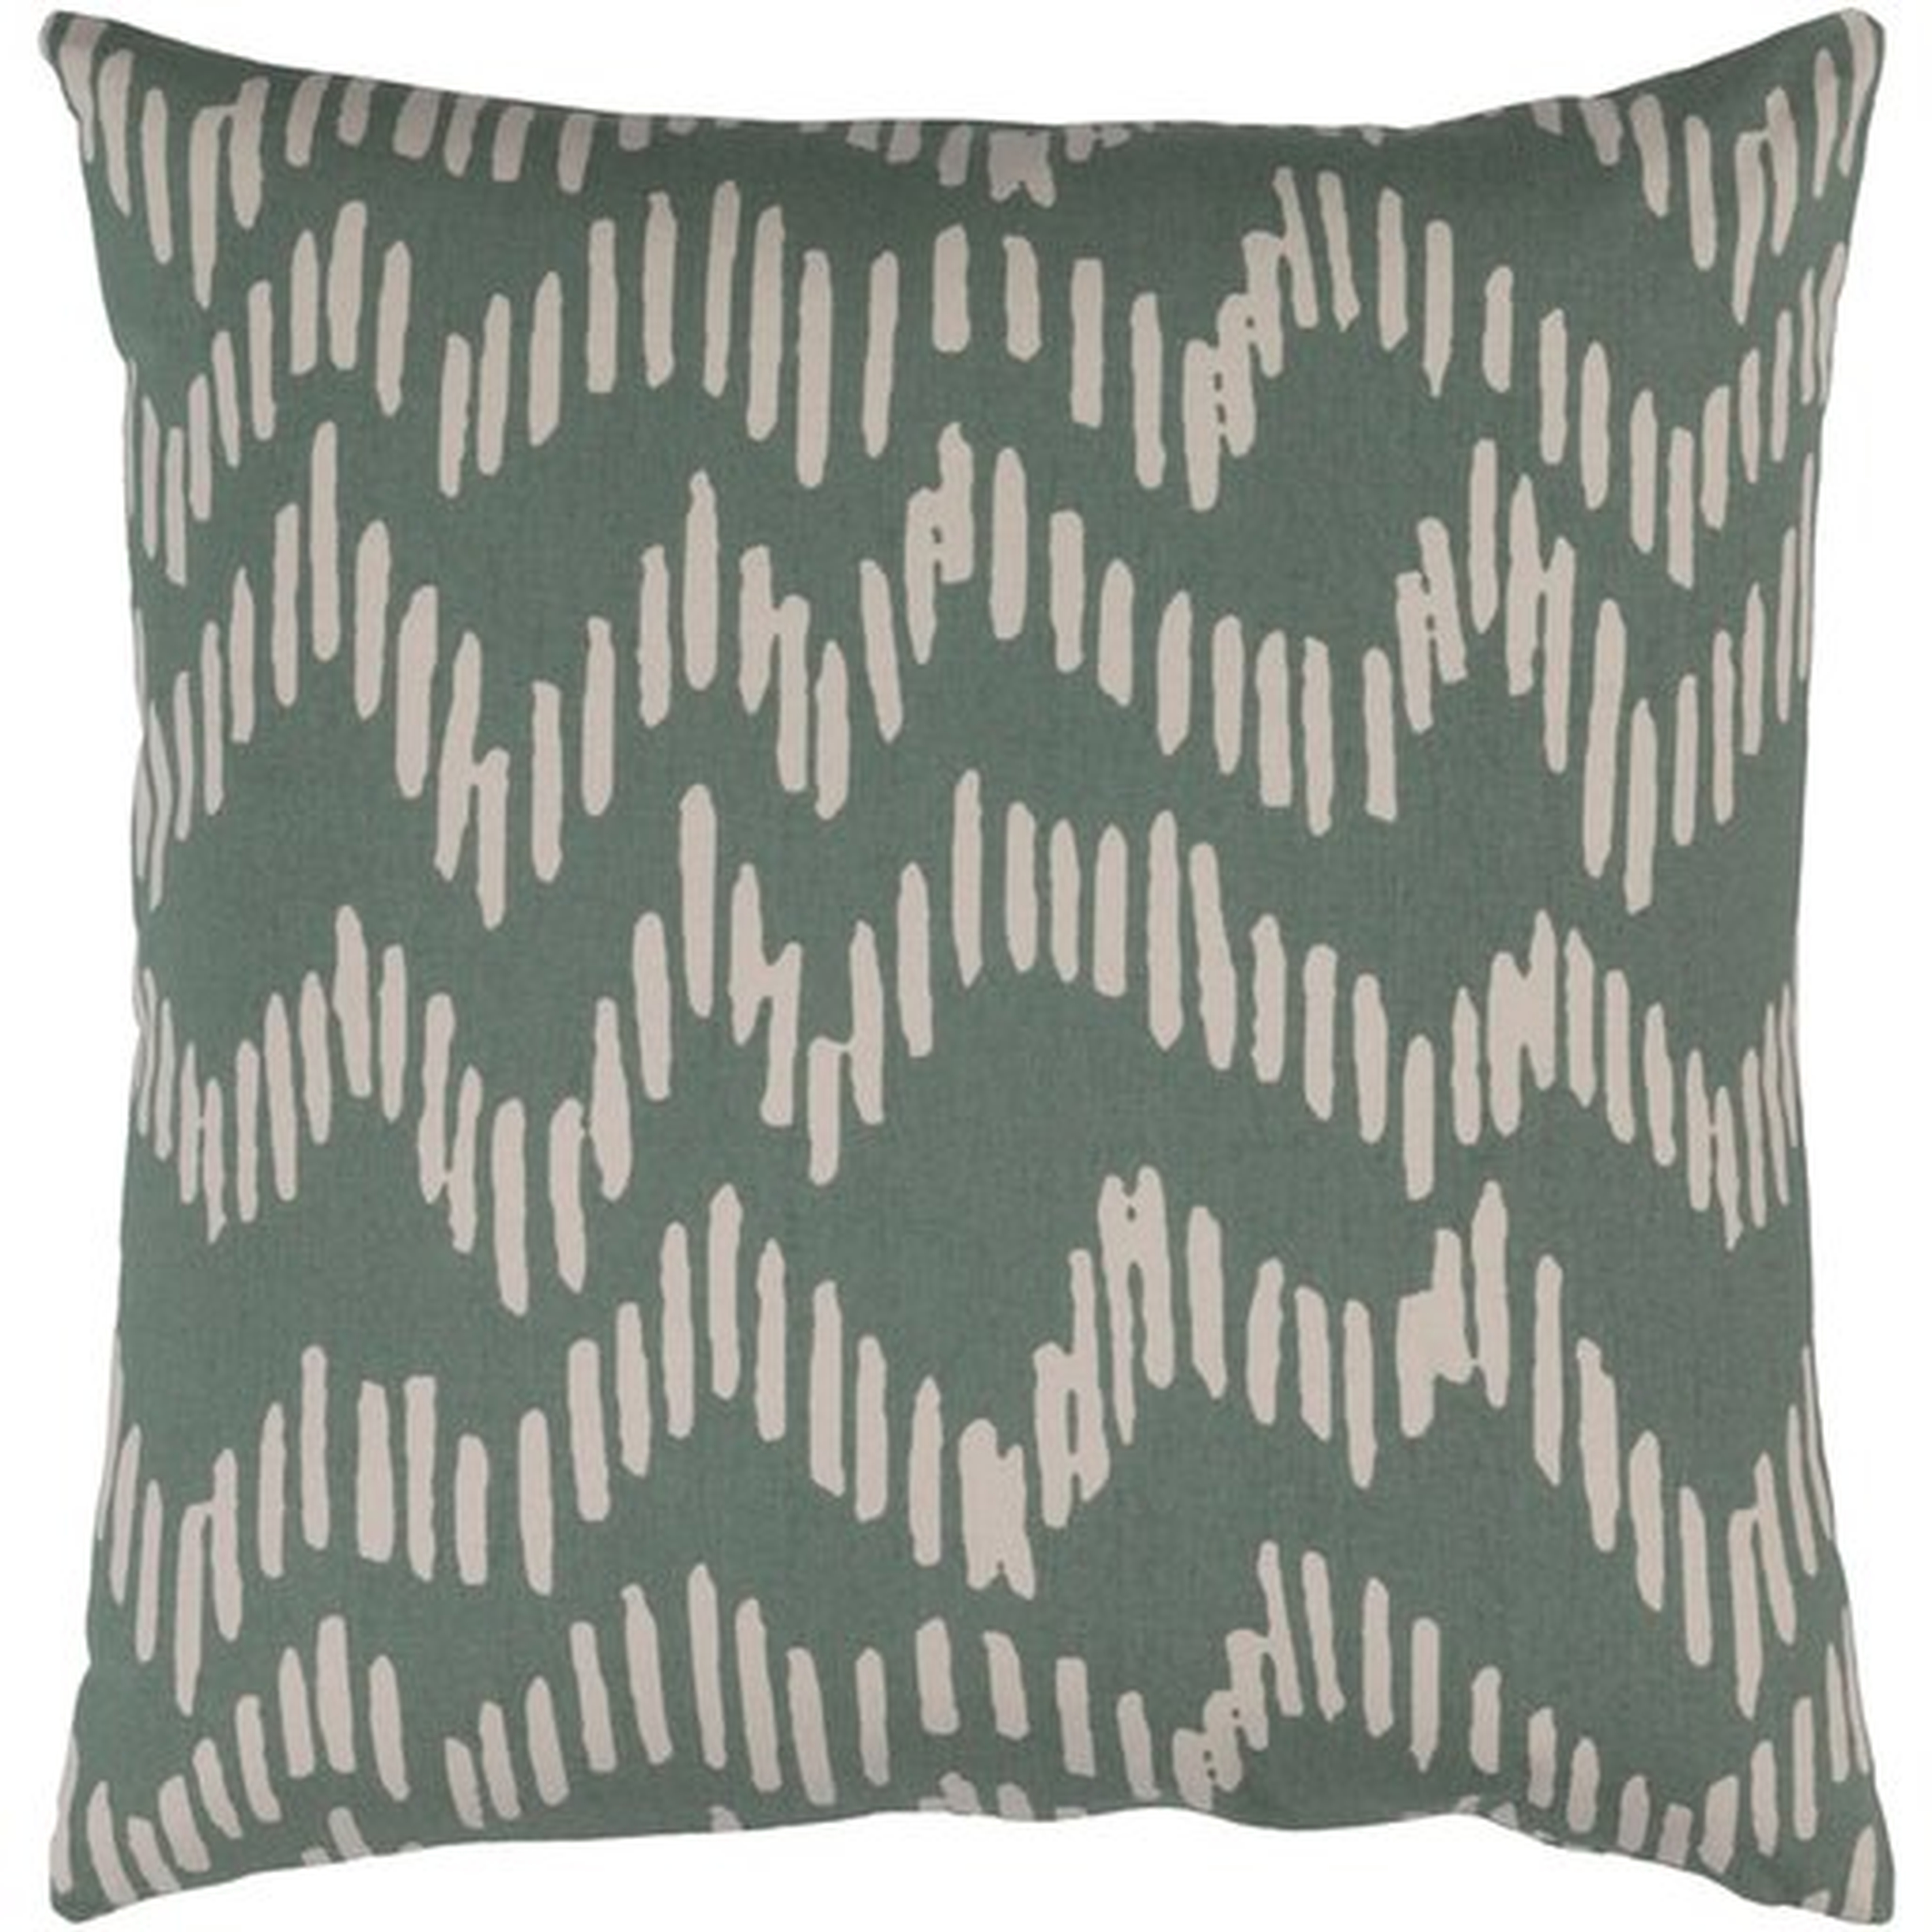 Somerset Throw Pillow, 22" x 22", with down insert - Surya